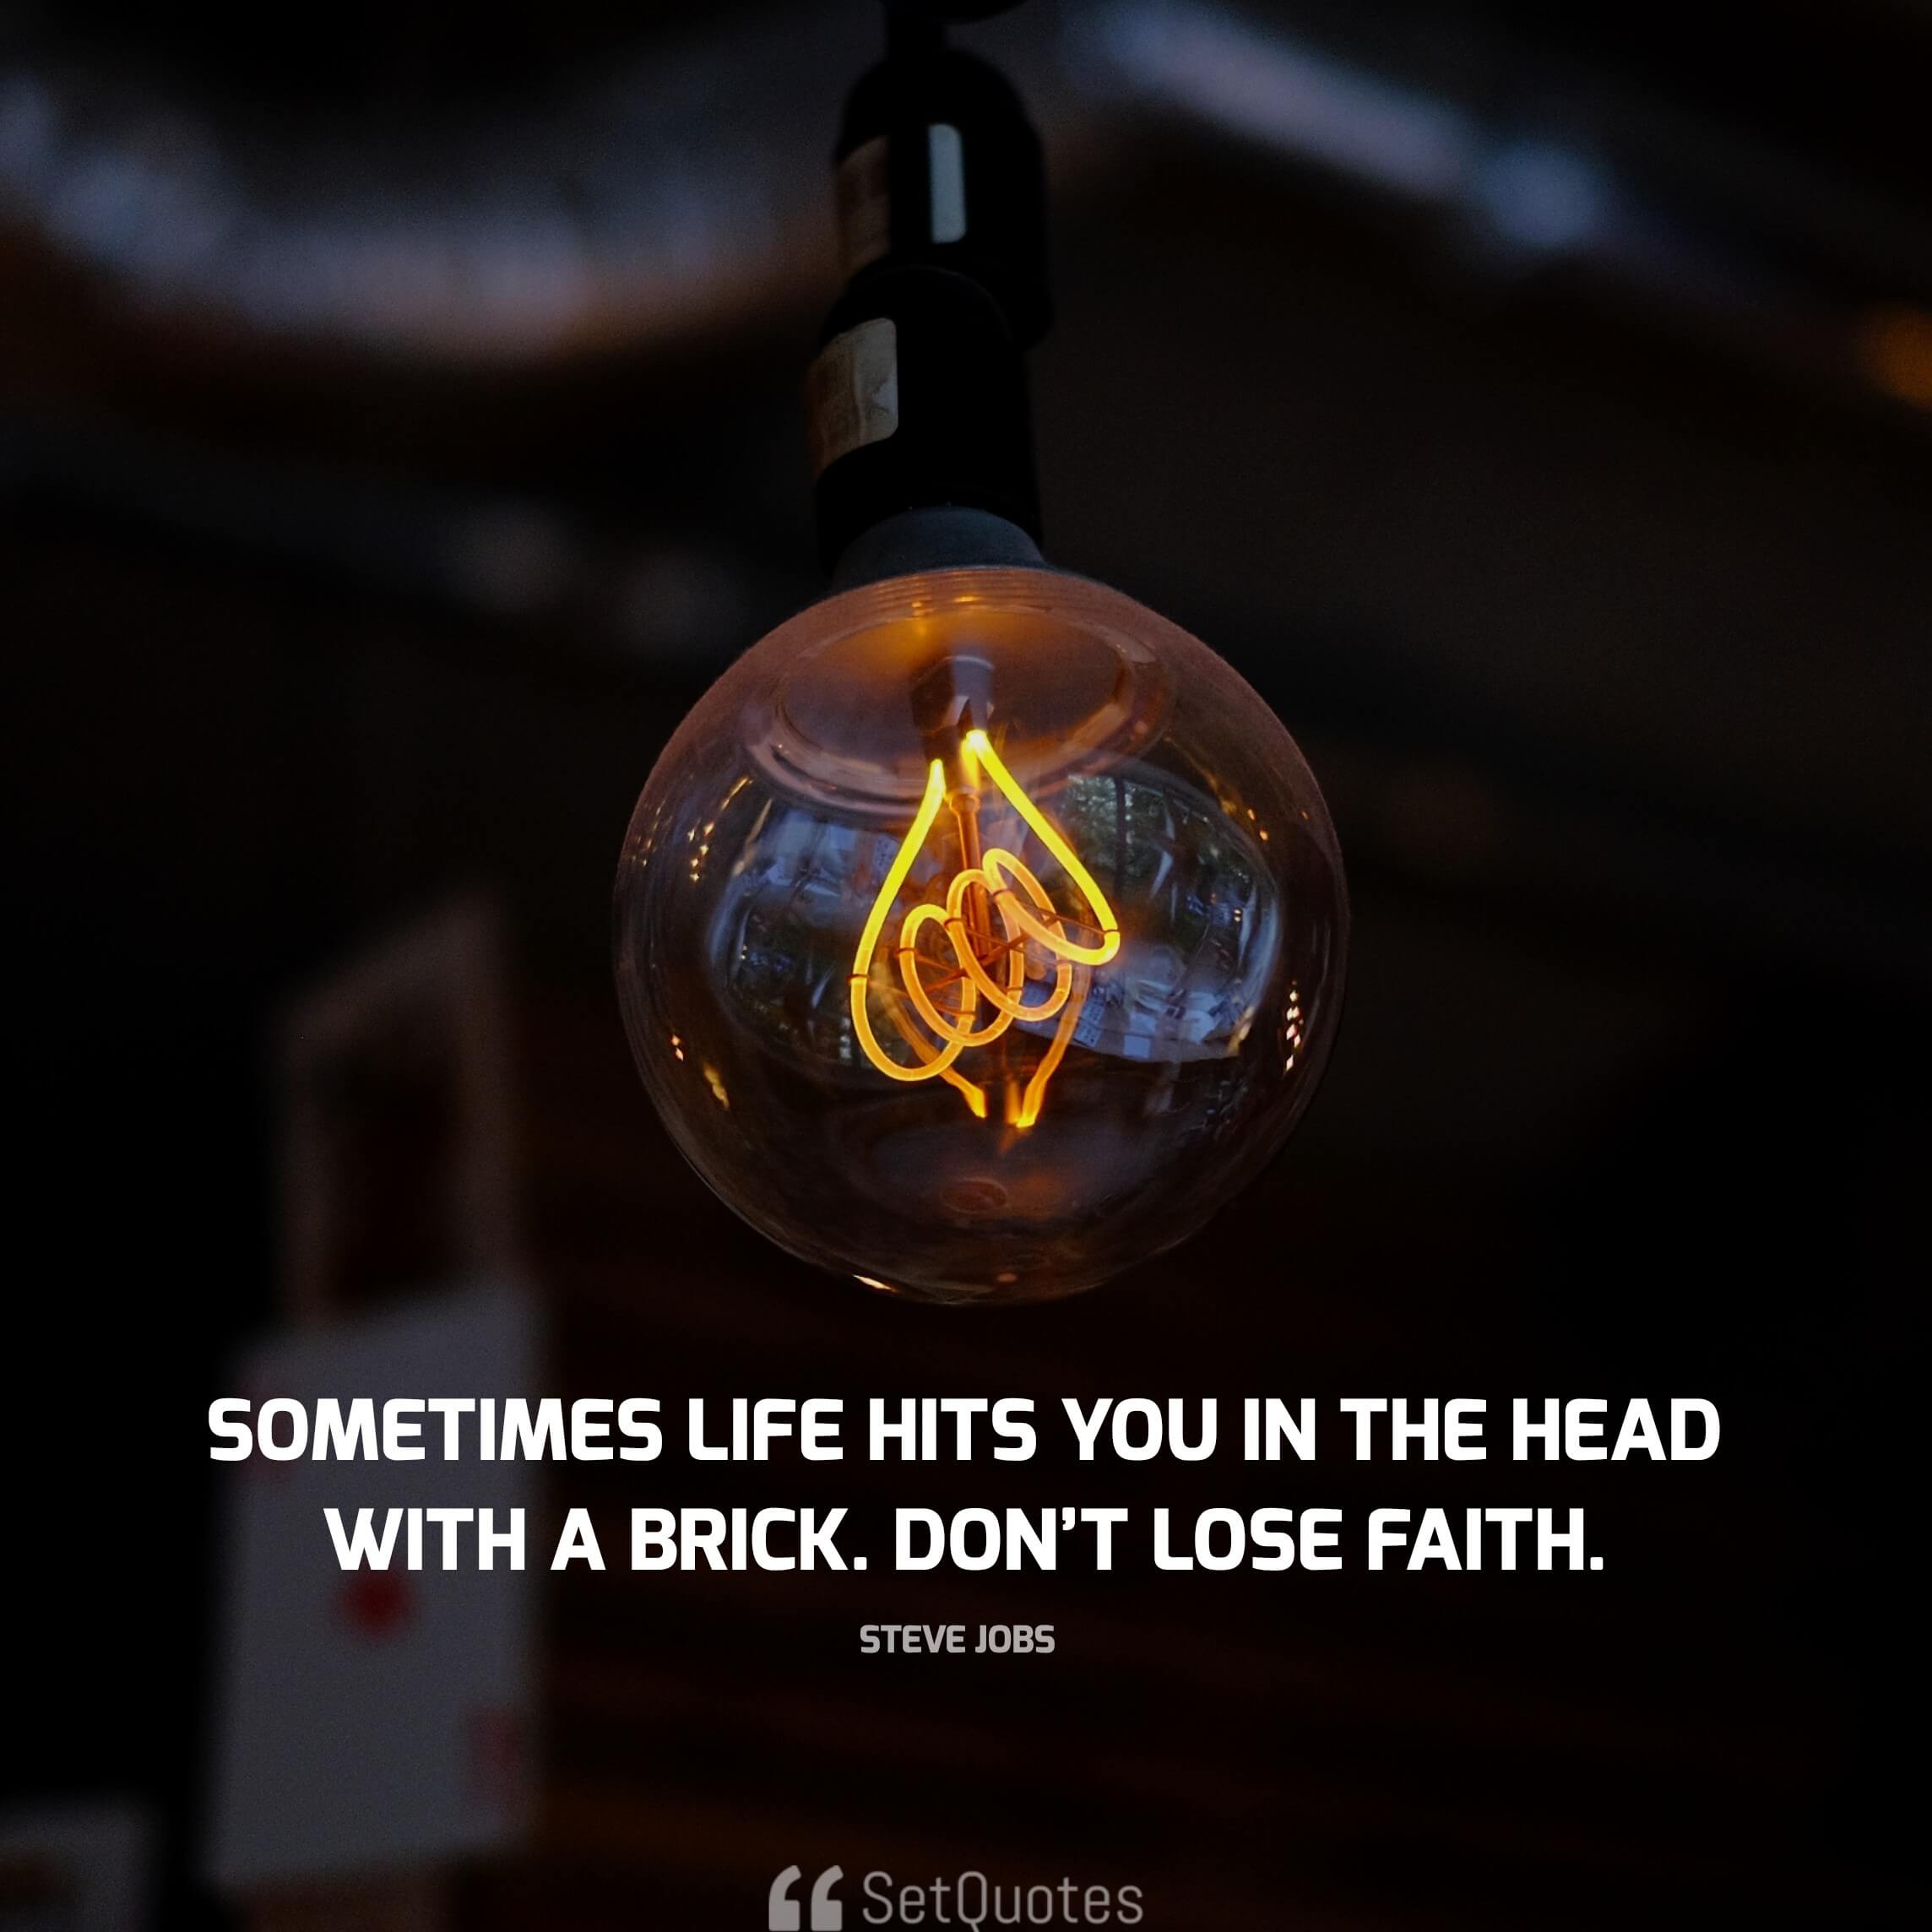 Sometimes life hits you in the head with a brick. Don’t lose faith. - steve jobs quotes